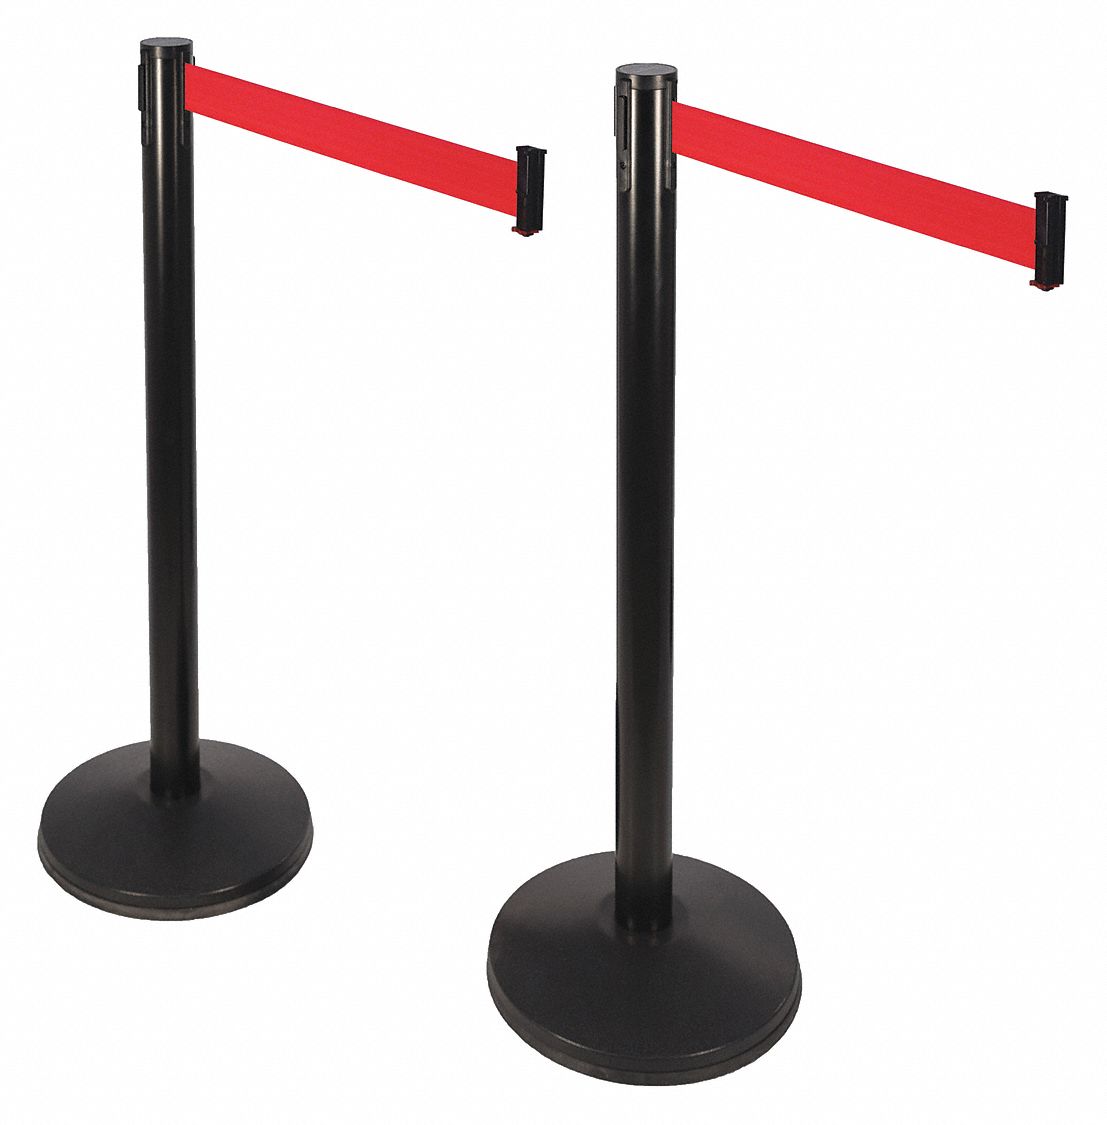 Barrier Post with Belt: Stainless Steel, Black, 40 in Post Ht, Sloped, Red, 2 PK